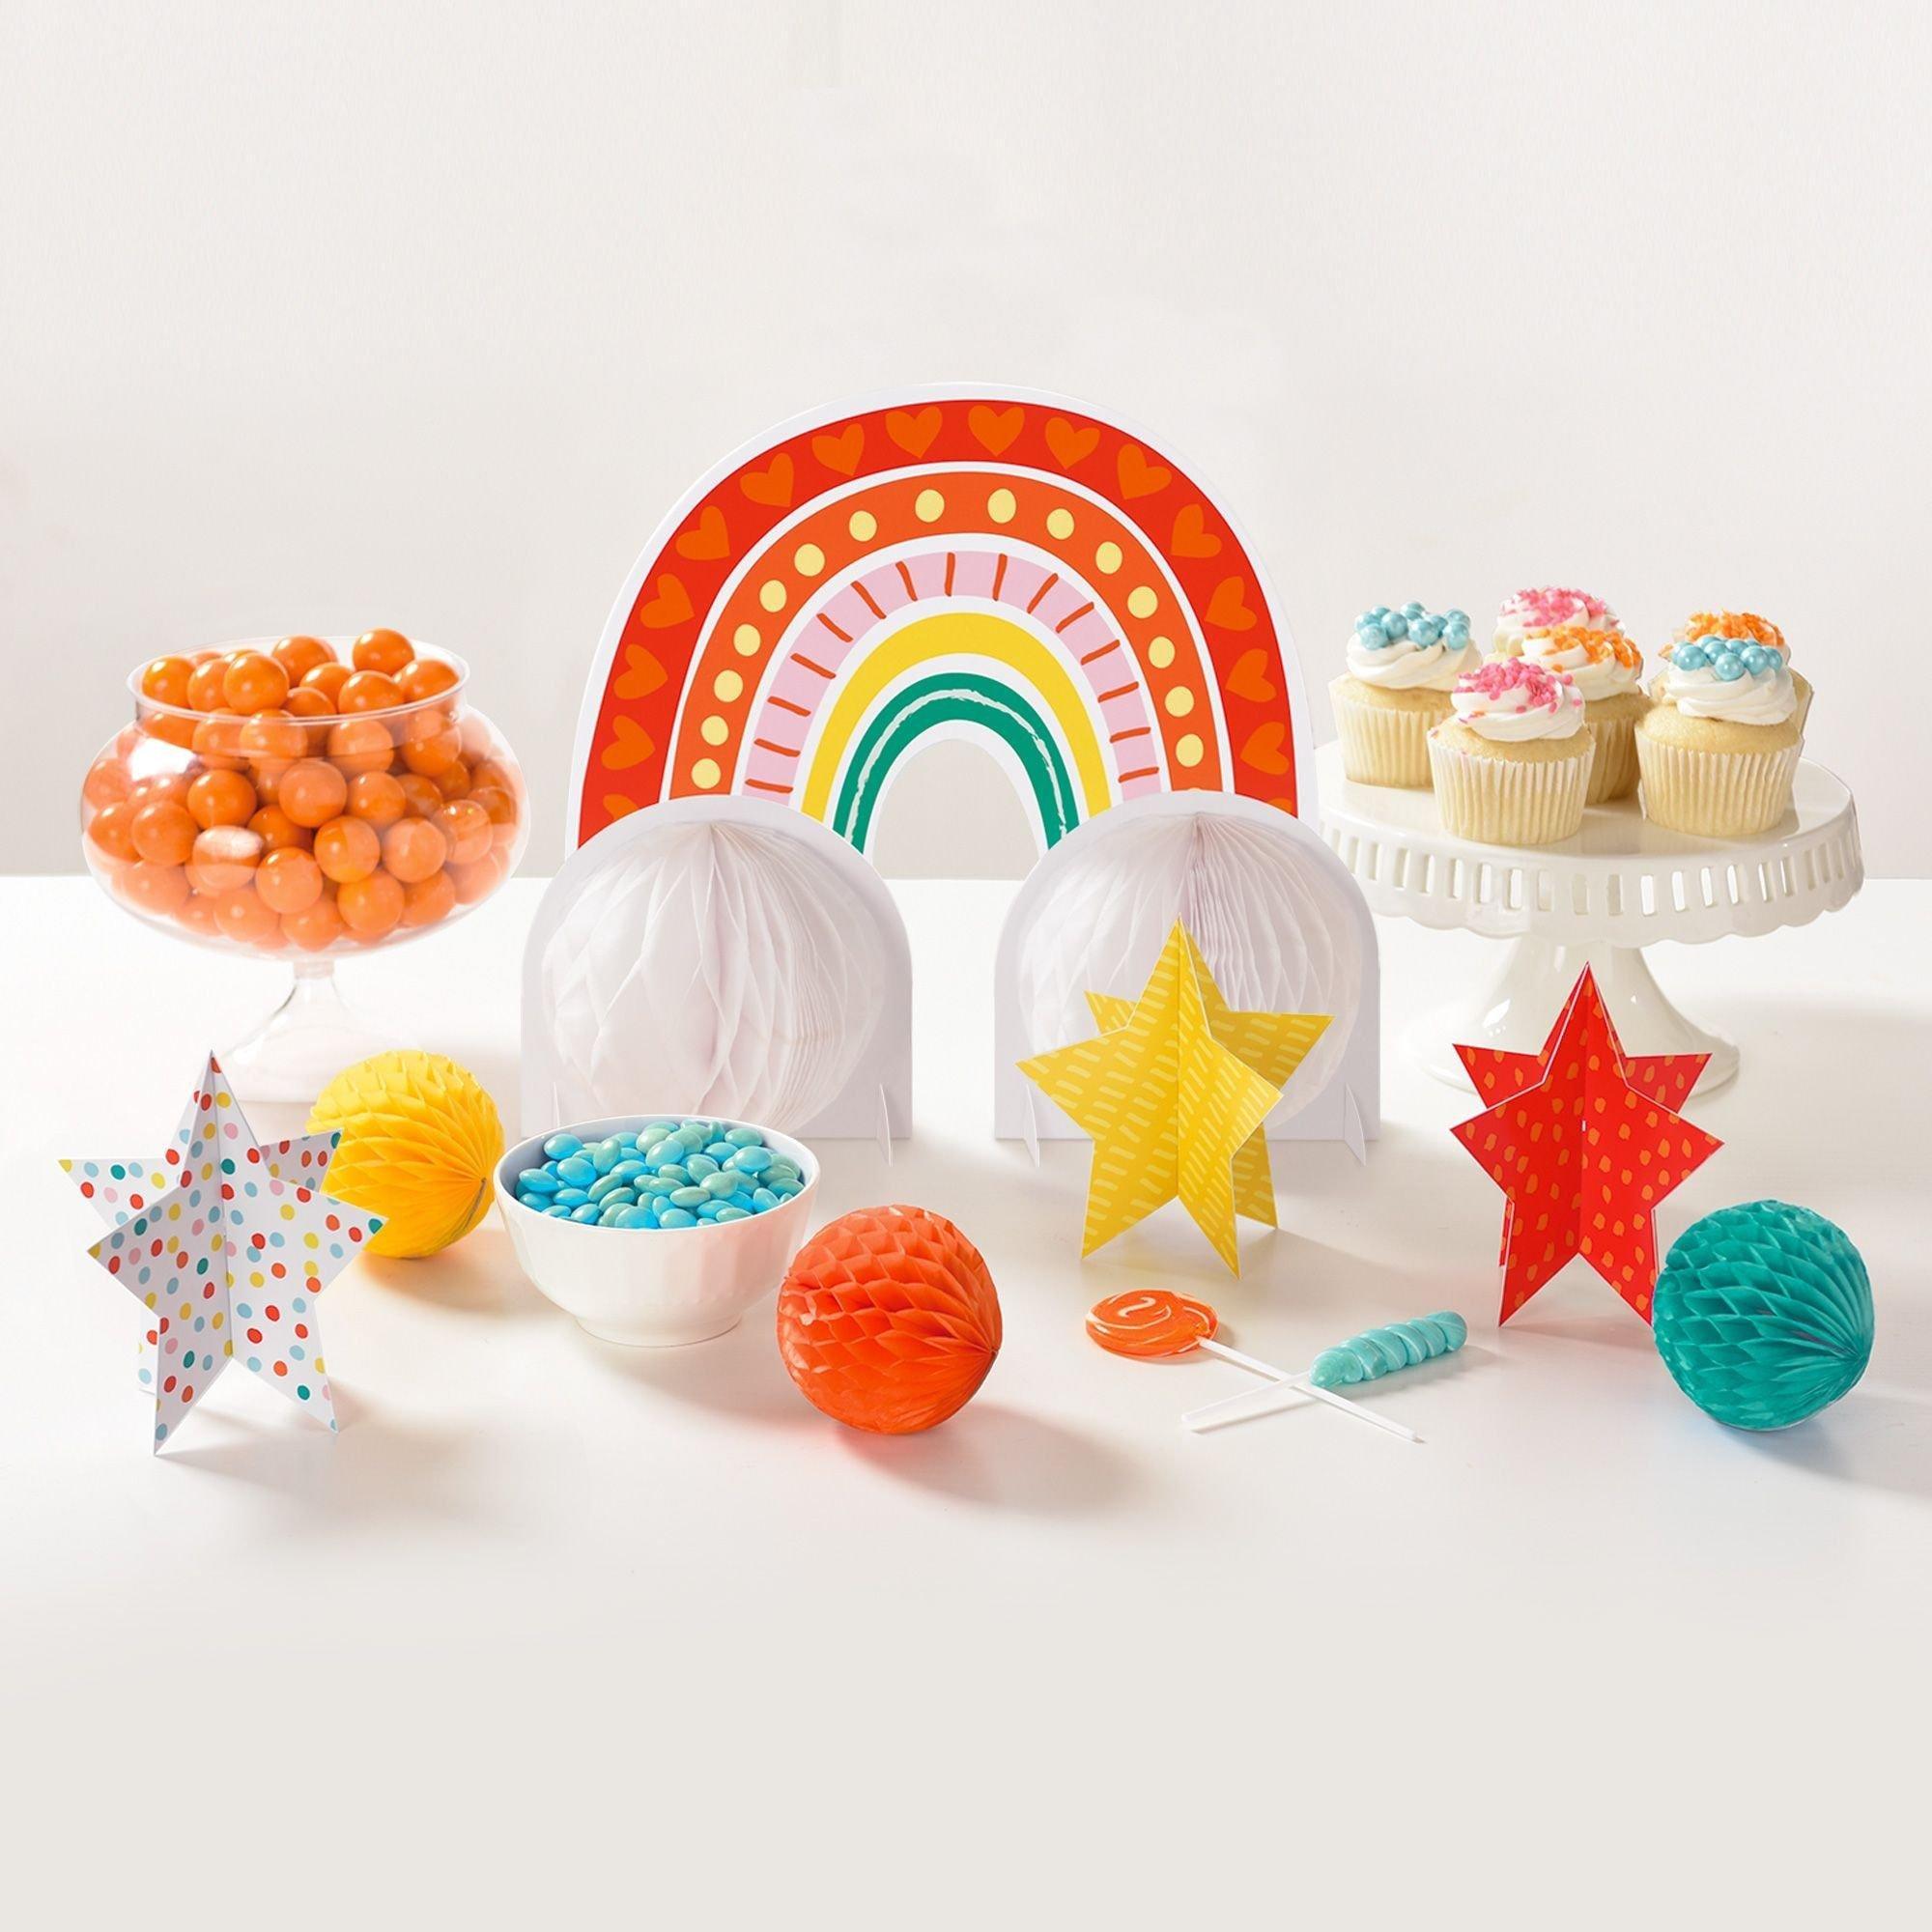 Compare prices for Retro Rainbow 2006 Birthday Decorations Party across all  European  stores